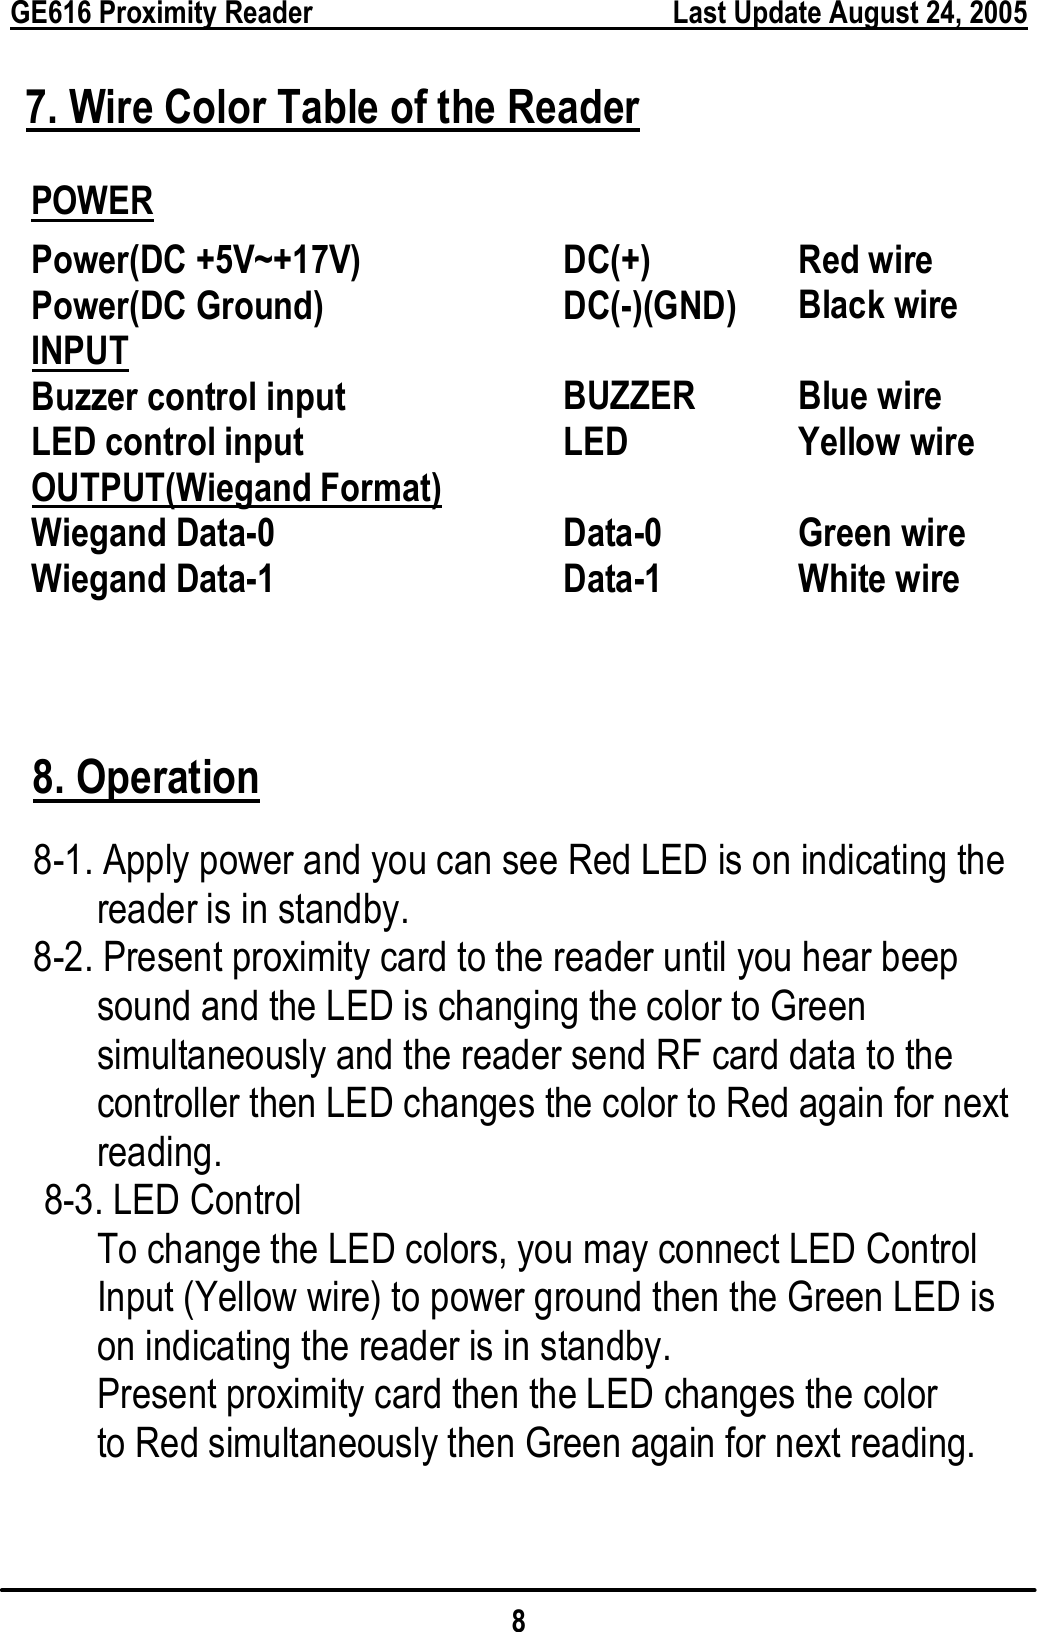  GE616 Proximity Reader        Last Update August 24, 2005 8 7. Wire Color Table of the Reader POWER   Power(DC +5V~+17V)  DC(+) Red wire Power(DC Ground)    DC(-)(GND) Black wire INPUT   Buzzer control input  BUZZER Blue wire LED control input  LED Yellow wire OUTPUT(Wiegand Format)    Wiegand Data-0  Data-0 Green wire Wiegand Data-1  Data-1 White wire  8. Operation 8-1. Apply power and you can see Red LED is on indicating the reader is in standby. 8-2. Present proximity card to the reader until you hear beep sound and the LED is changing the color to Green simultaneously and the reader send RF card data to the controller then LED changes the color to Red again for next reading. 8-3. LED Control To change the LED colors, you may connect LED Control Input (Yellow wire) to power ground then the Green LED is on indicating the reader is in standby. Present proximity card then the LED changes the color to Red simultaneously then Green again for next reading. 